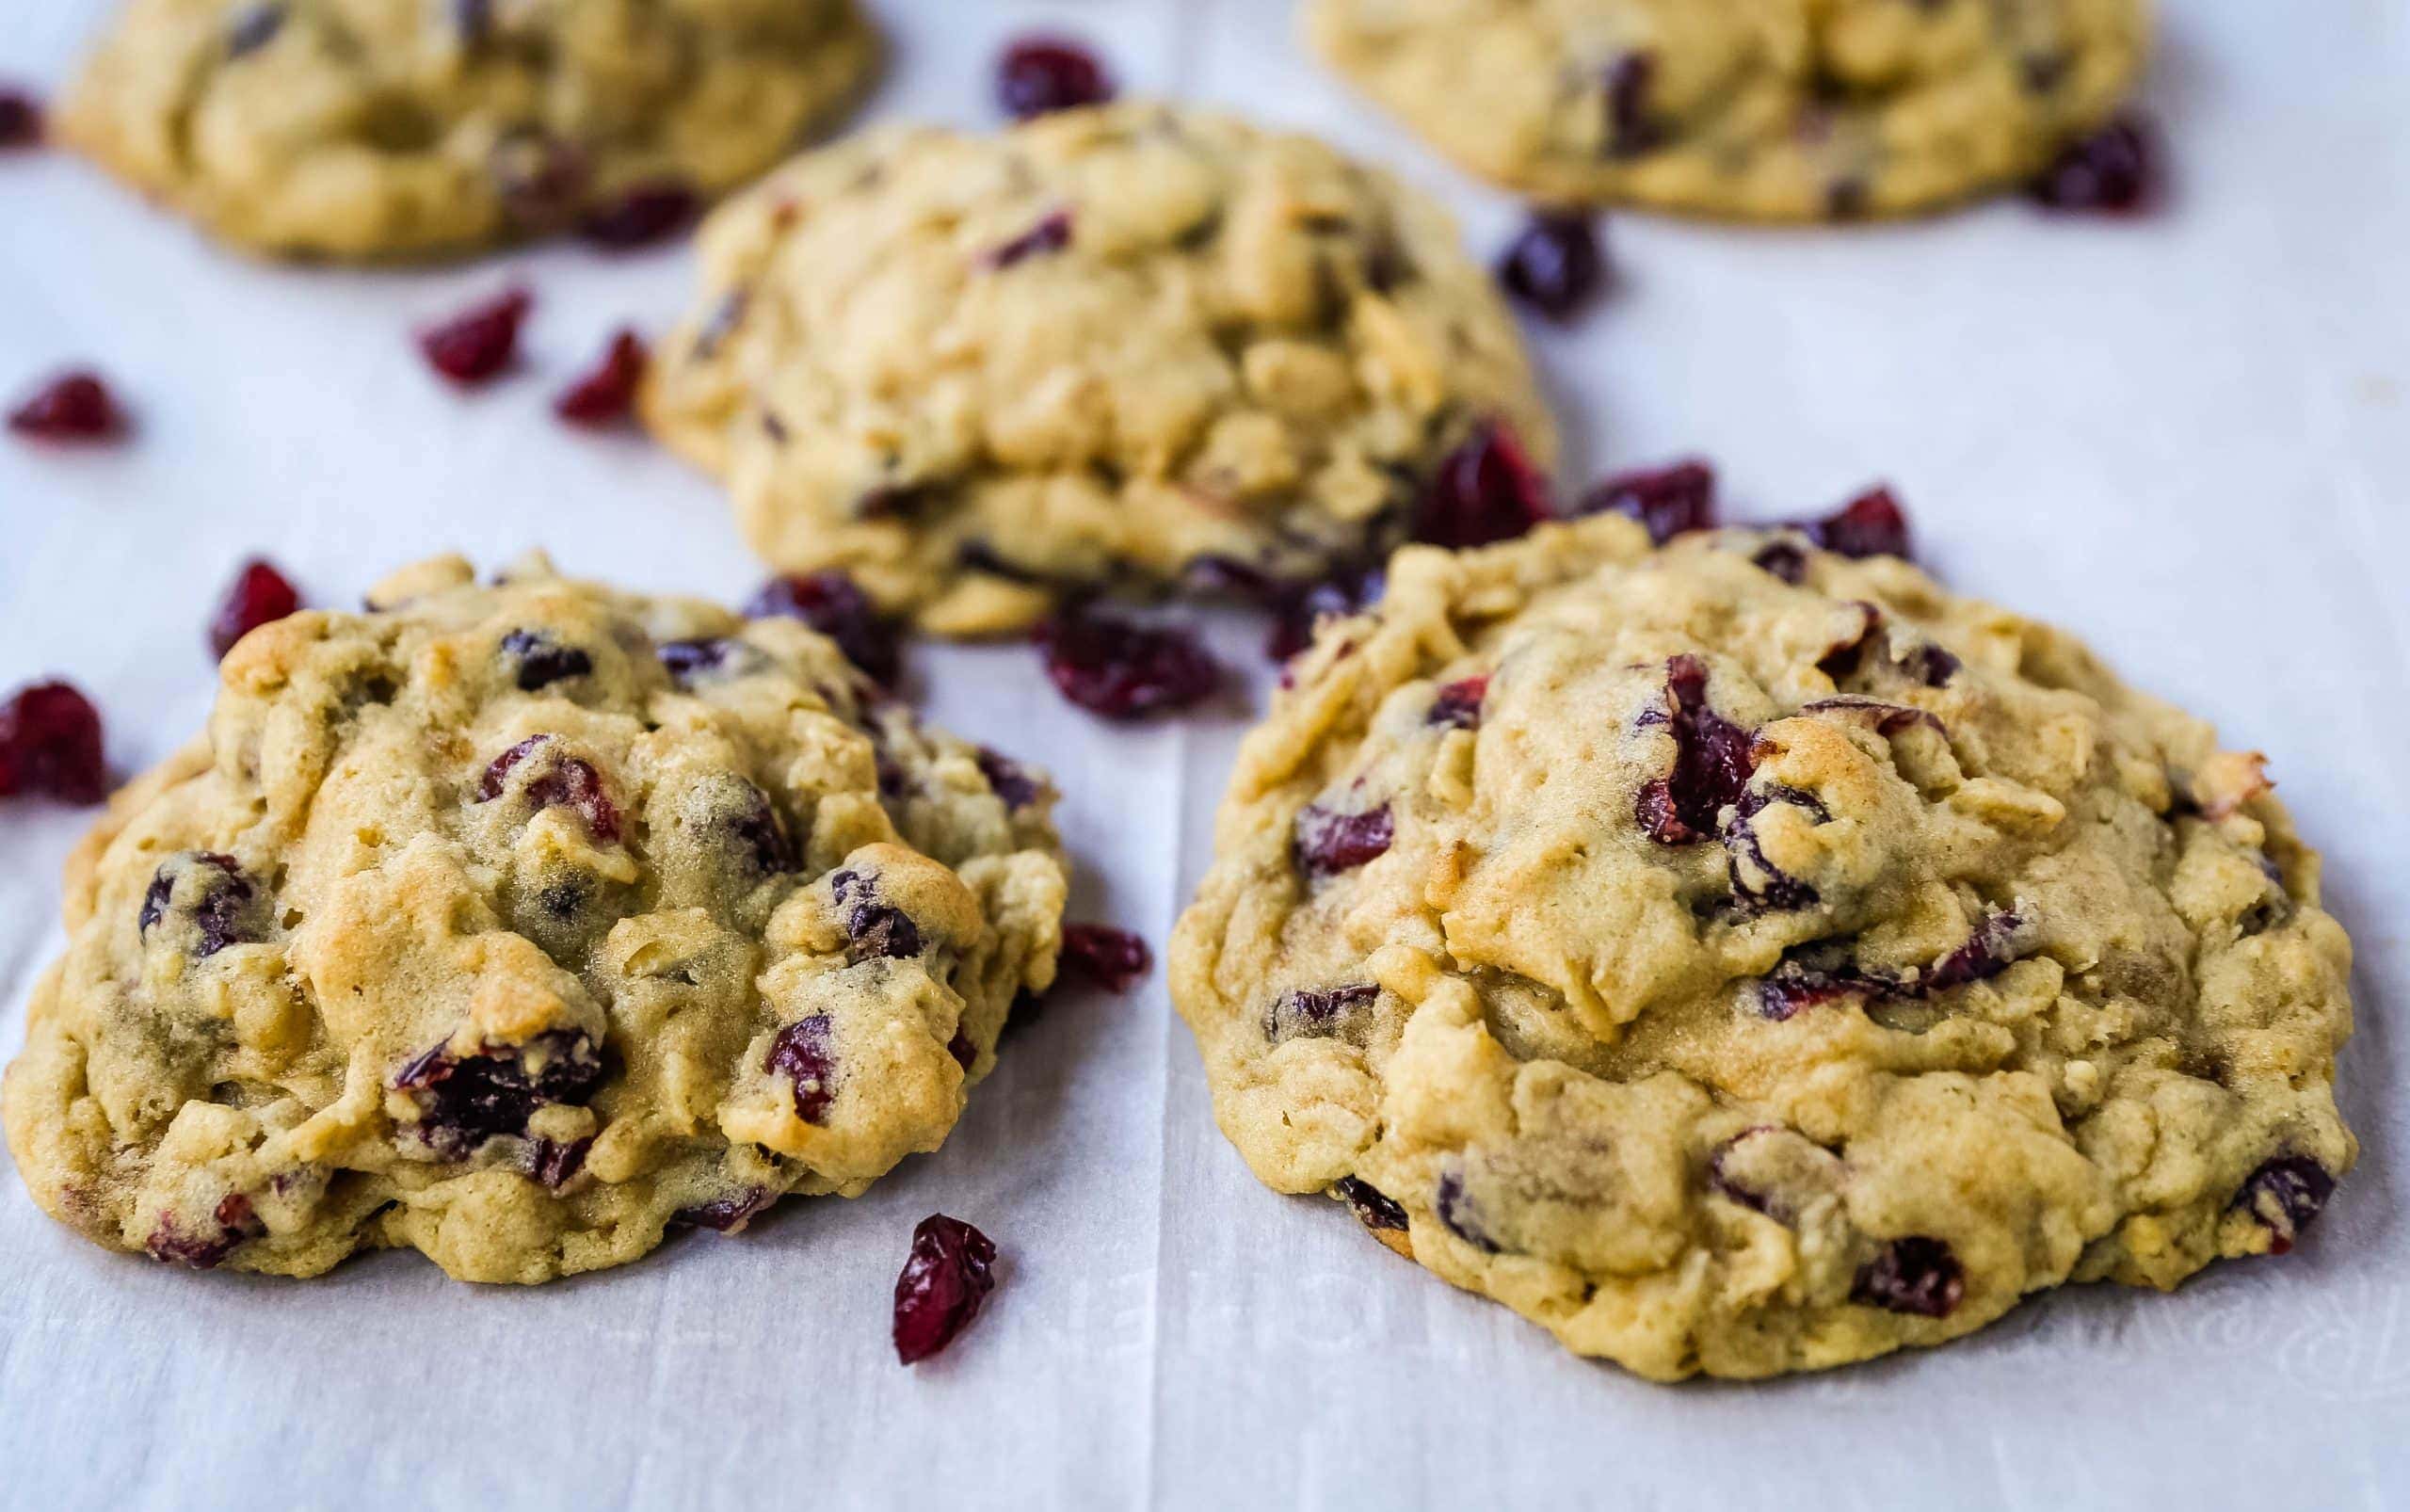 Cranberry Oatmeal Cookies Soft chewy brown sugar oatmeal cookies with sweetened dried cranberries. A chewy and hearty oatmeal cookie that everyone will love! www.modernhoney.com #oatmealcookie #oatmealcookies #cranberryoatmeal #cookie #cookies